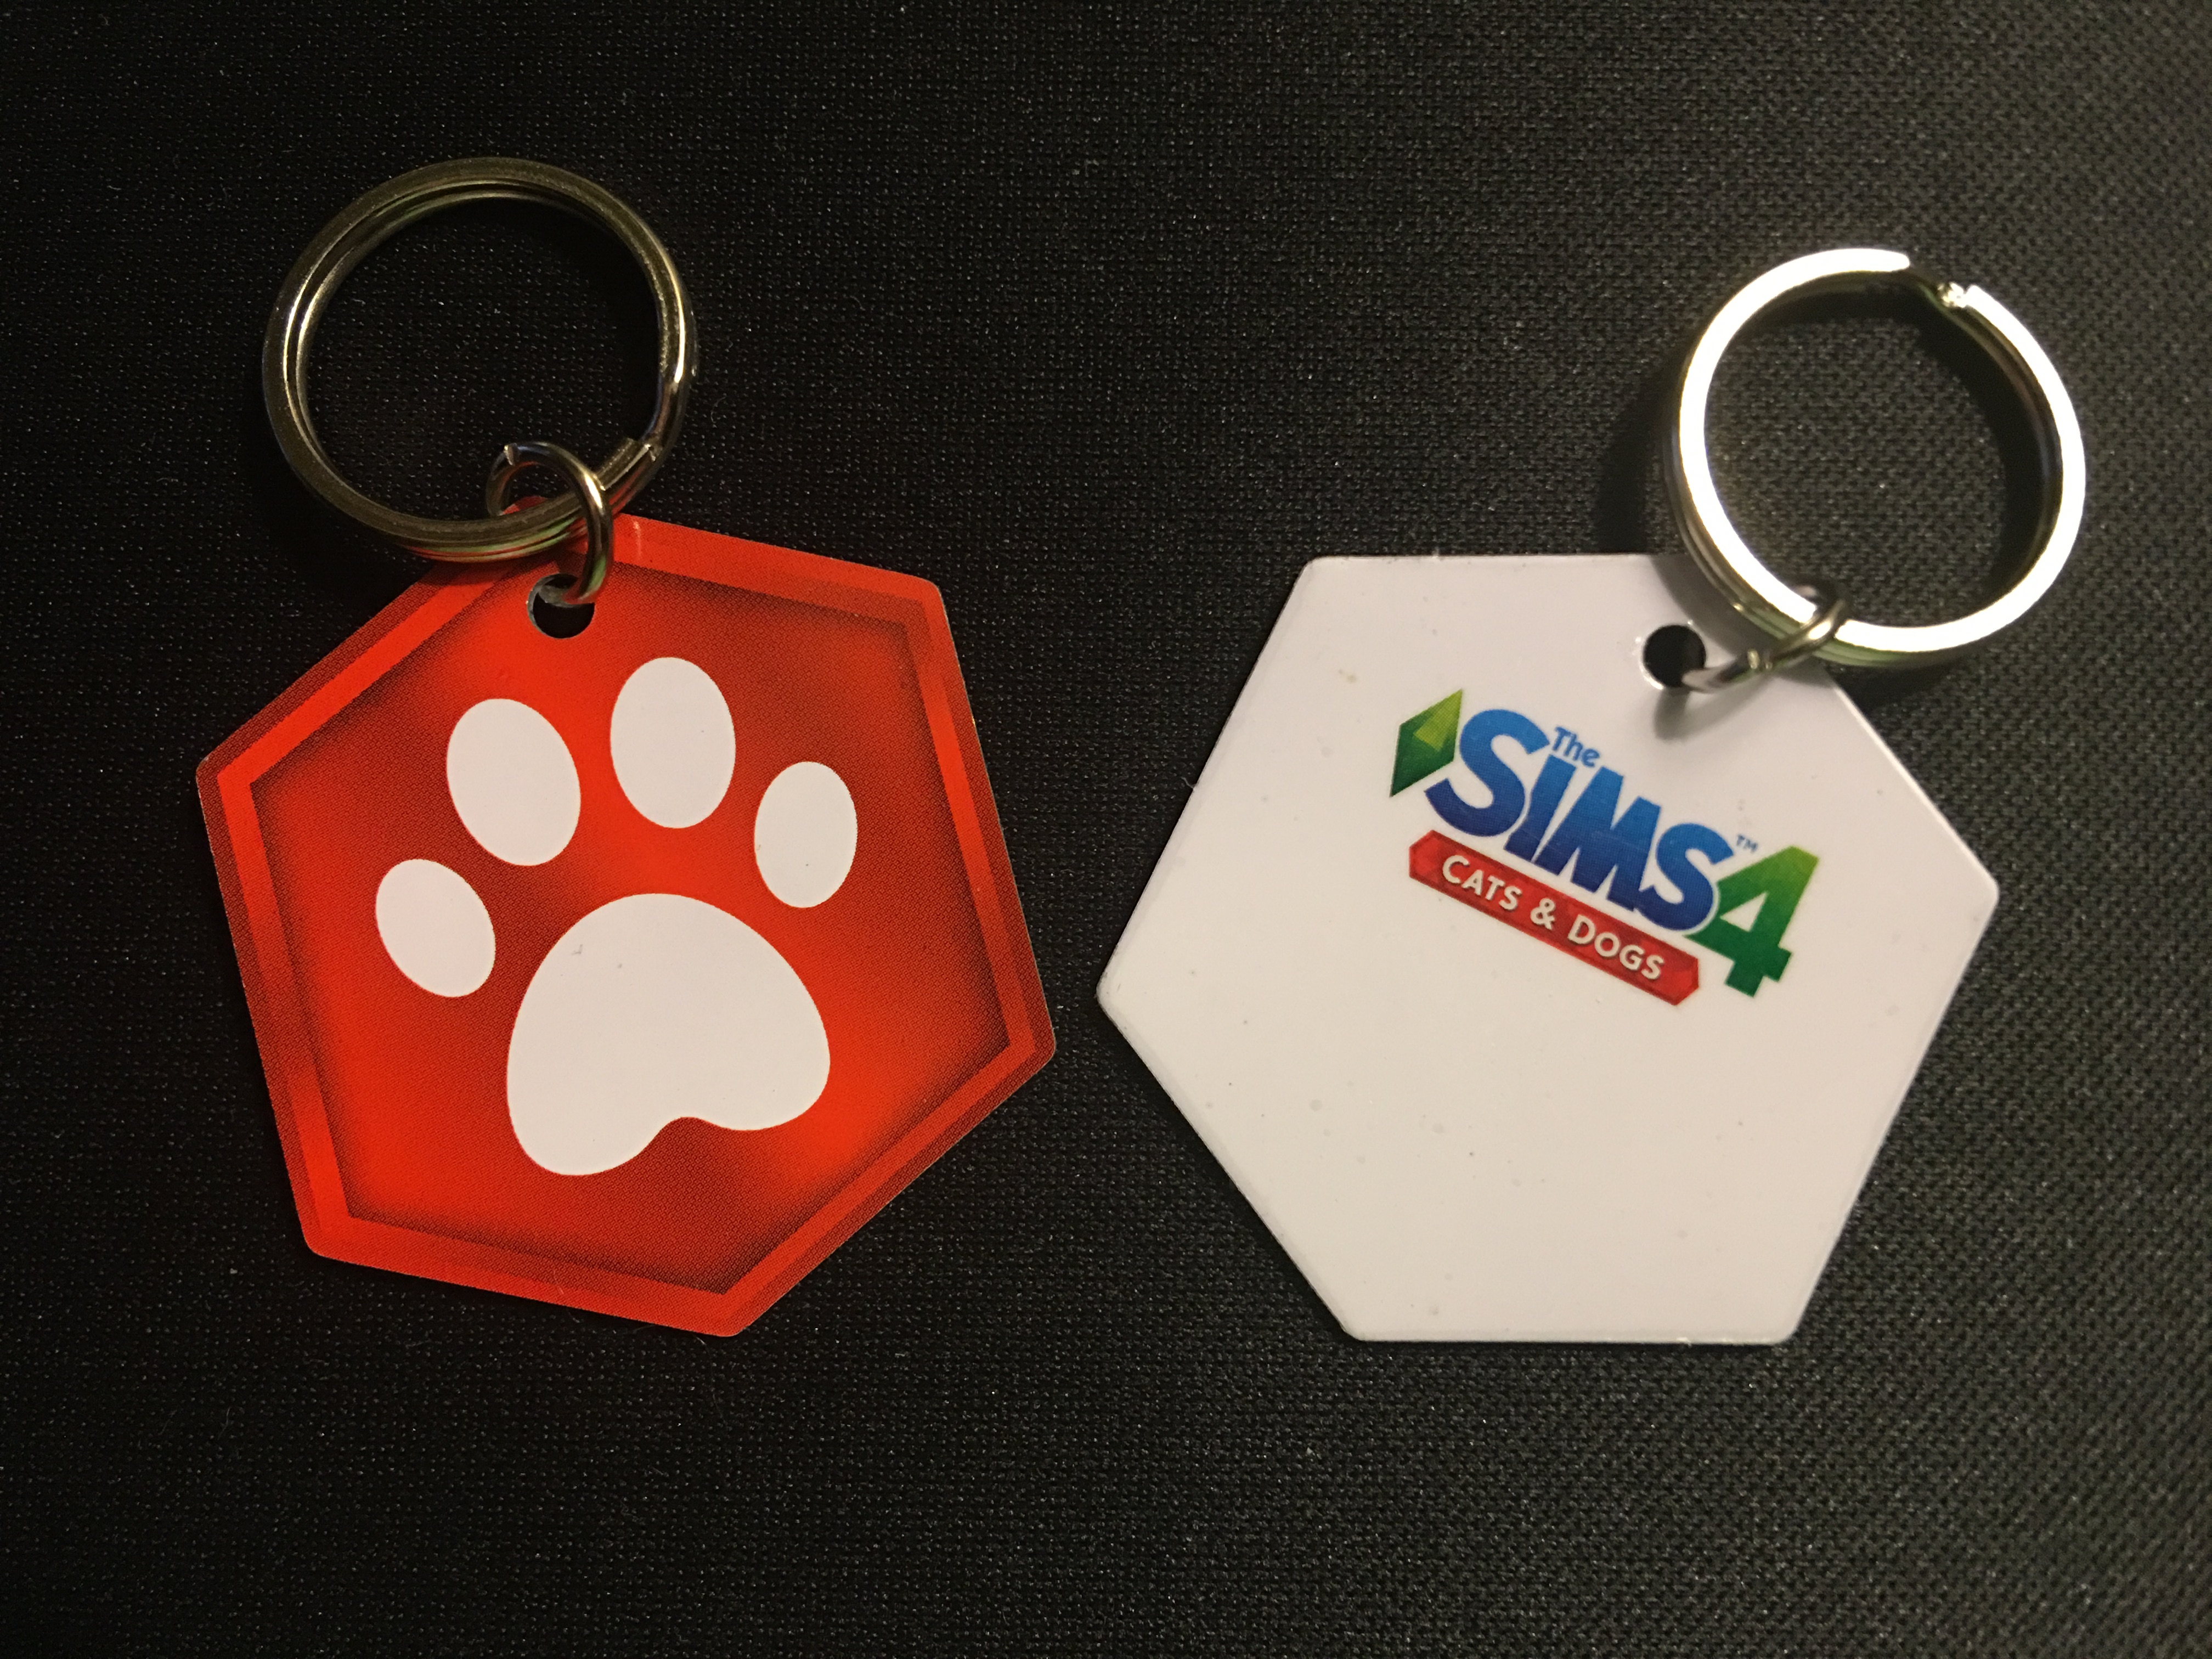 The Sims 4 Cats & Dogs: Check Out the Best Buy Exclusive ...